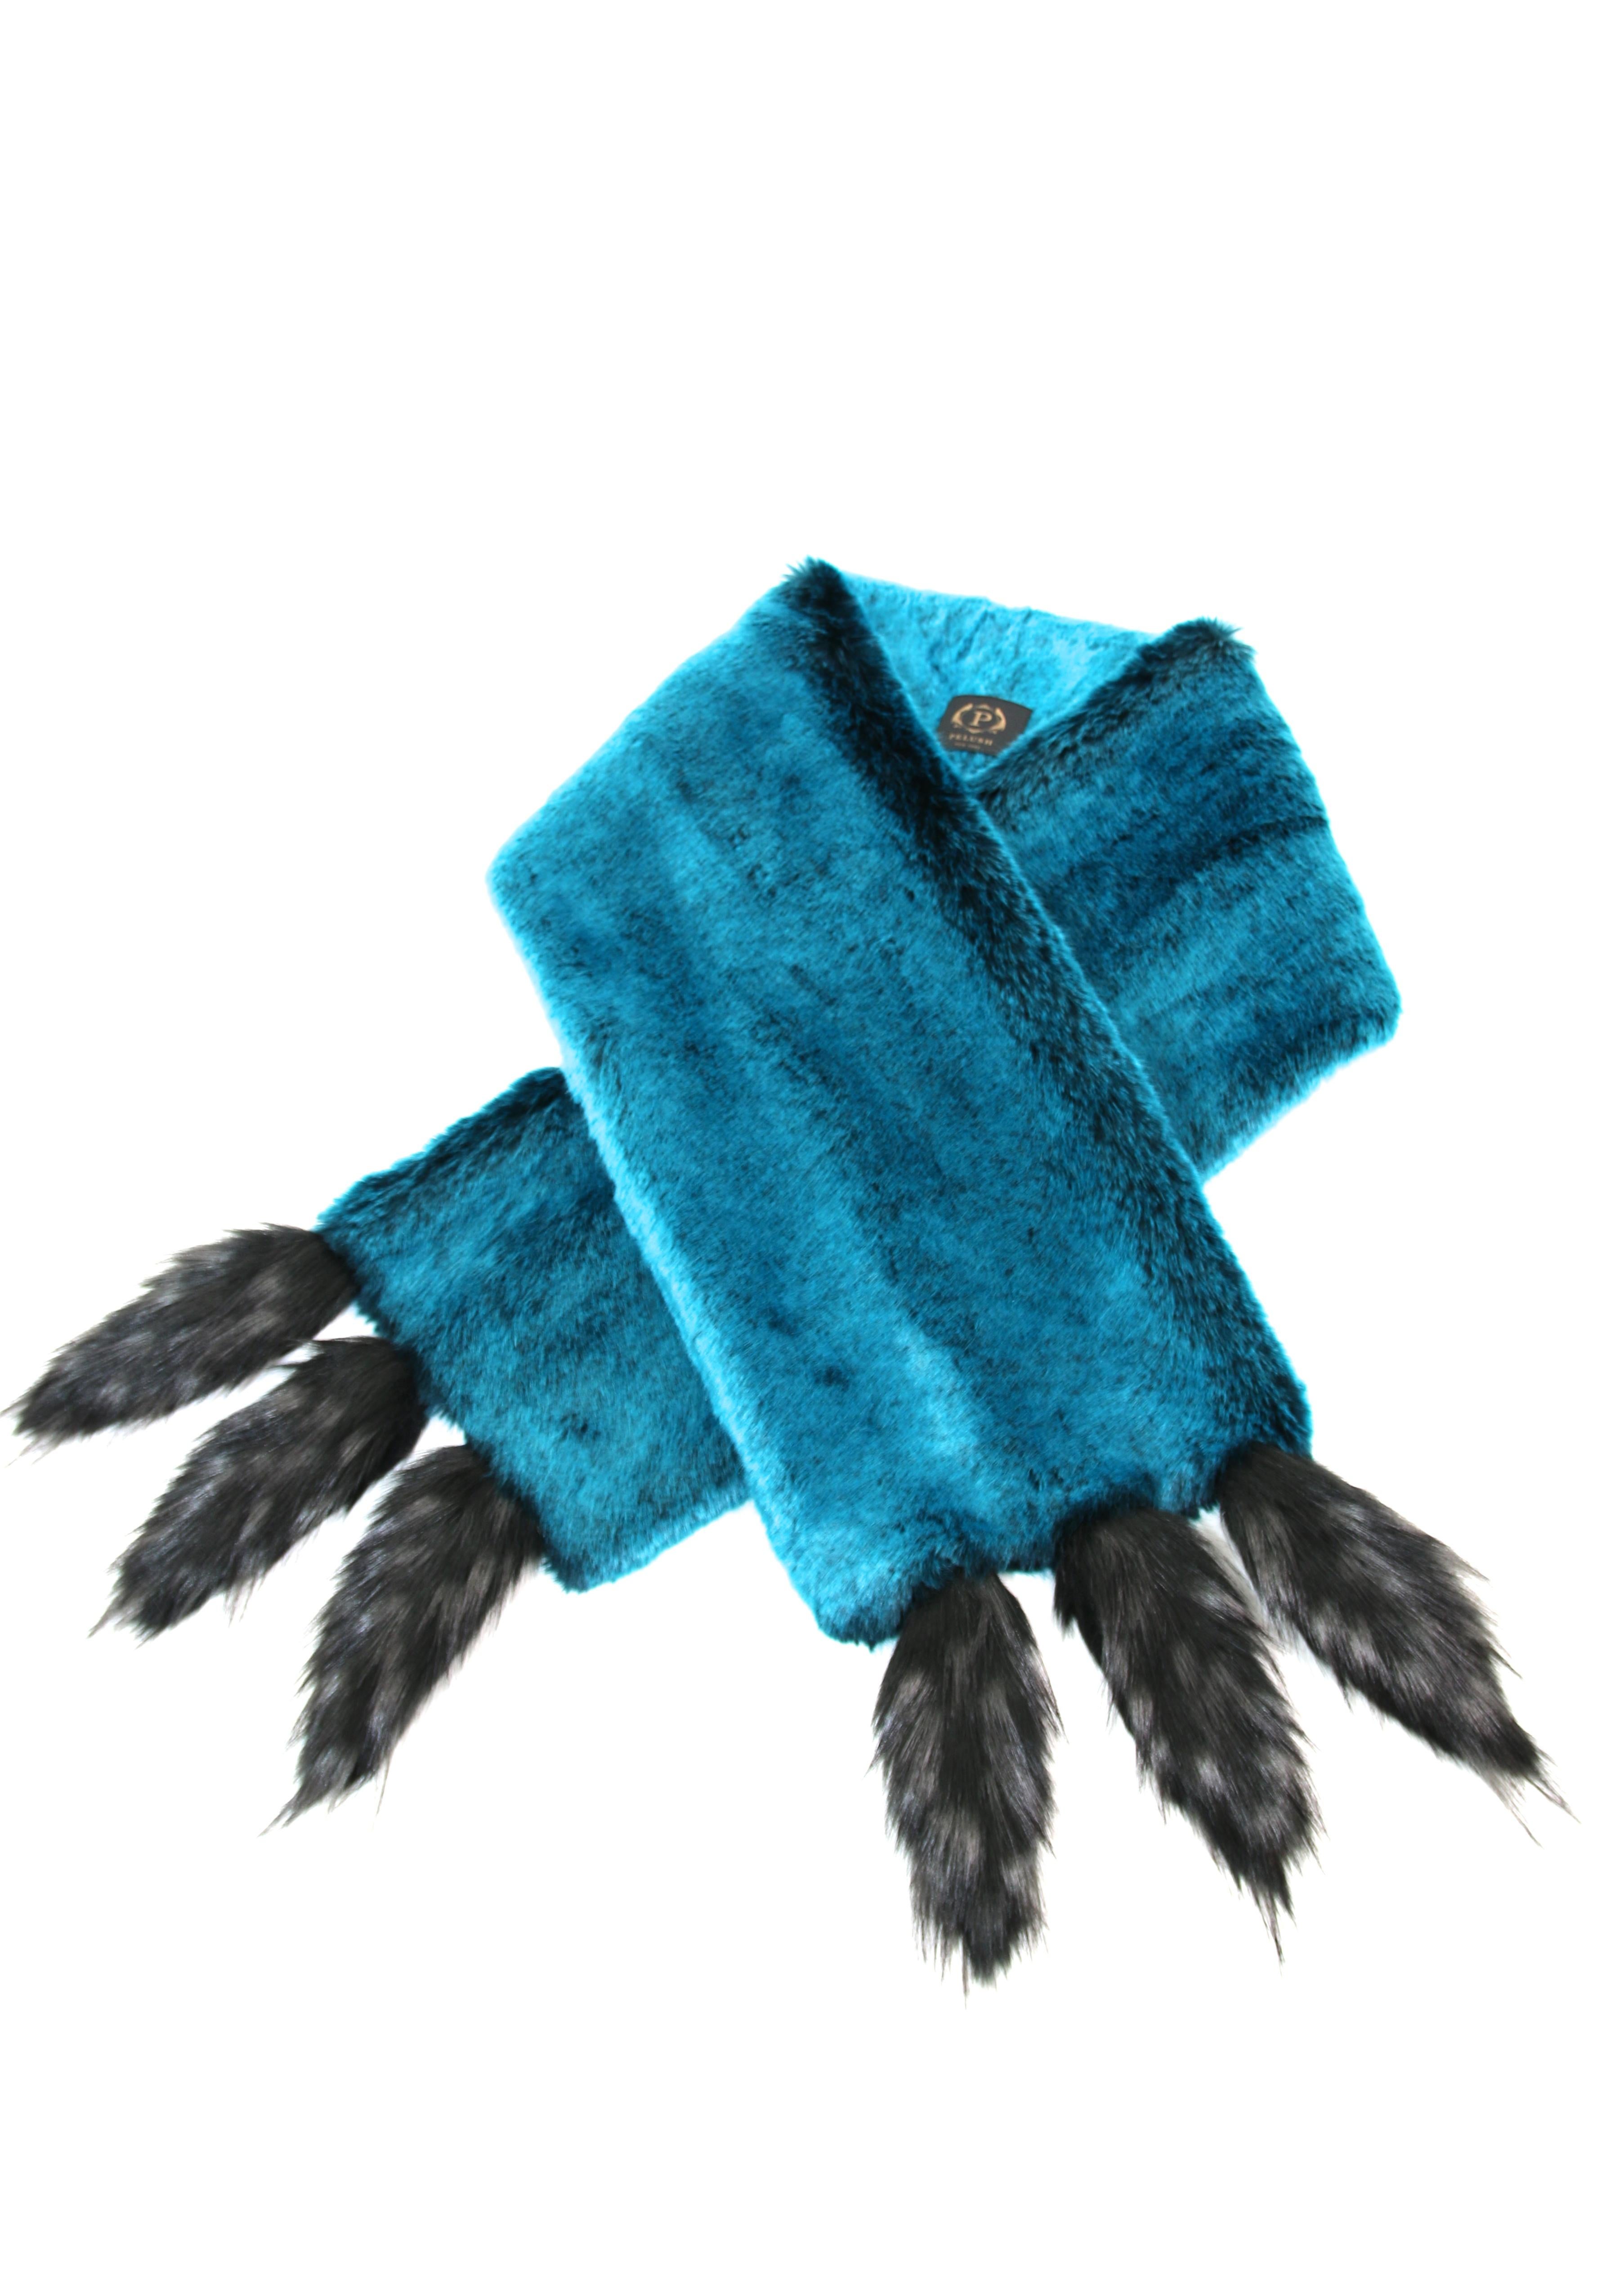 The Anais Pelush teal faux fur chinchilla stole with faux fox fringes is a one of a kind exclusive piece. Featuring the highest quality man made pelage, this eye- catching stole is an extraordinary replica of the chinchilla fur and fox fur.